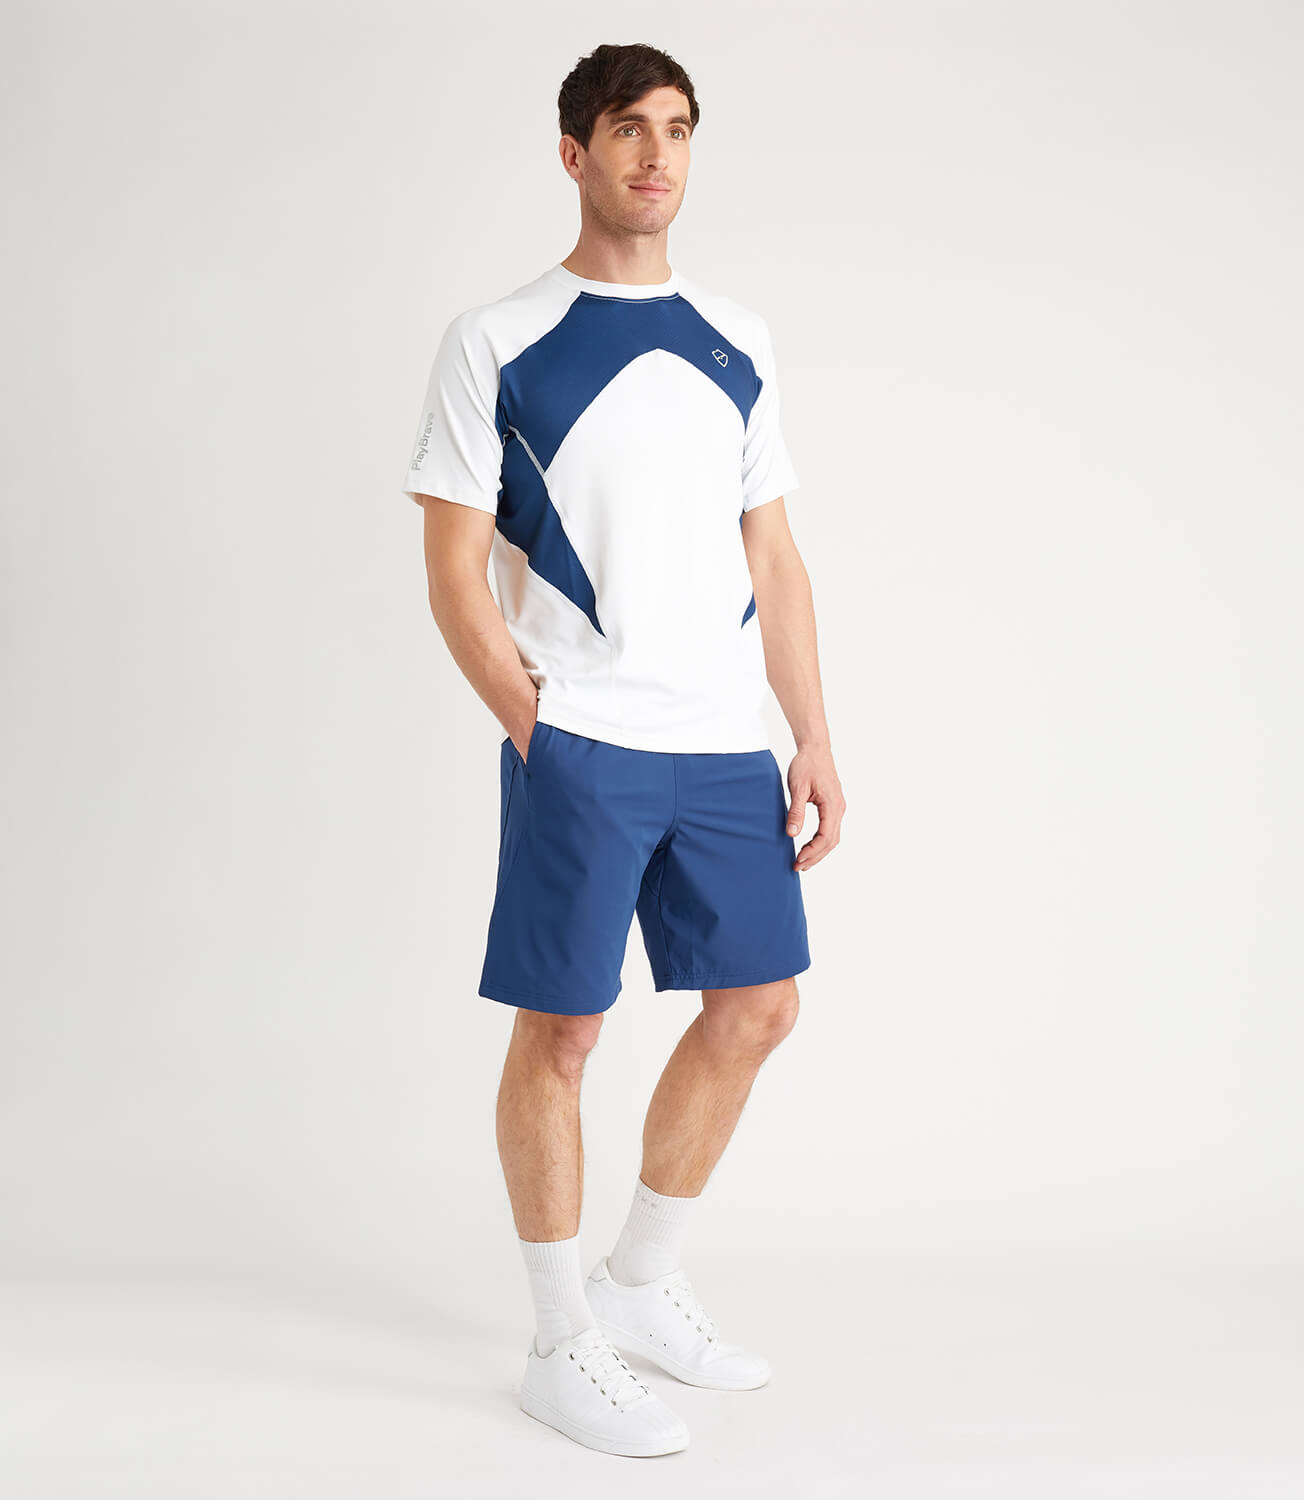 Terence Technical Tee - White/Blue